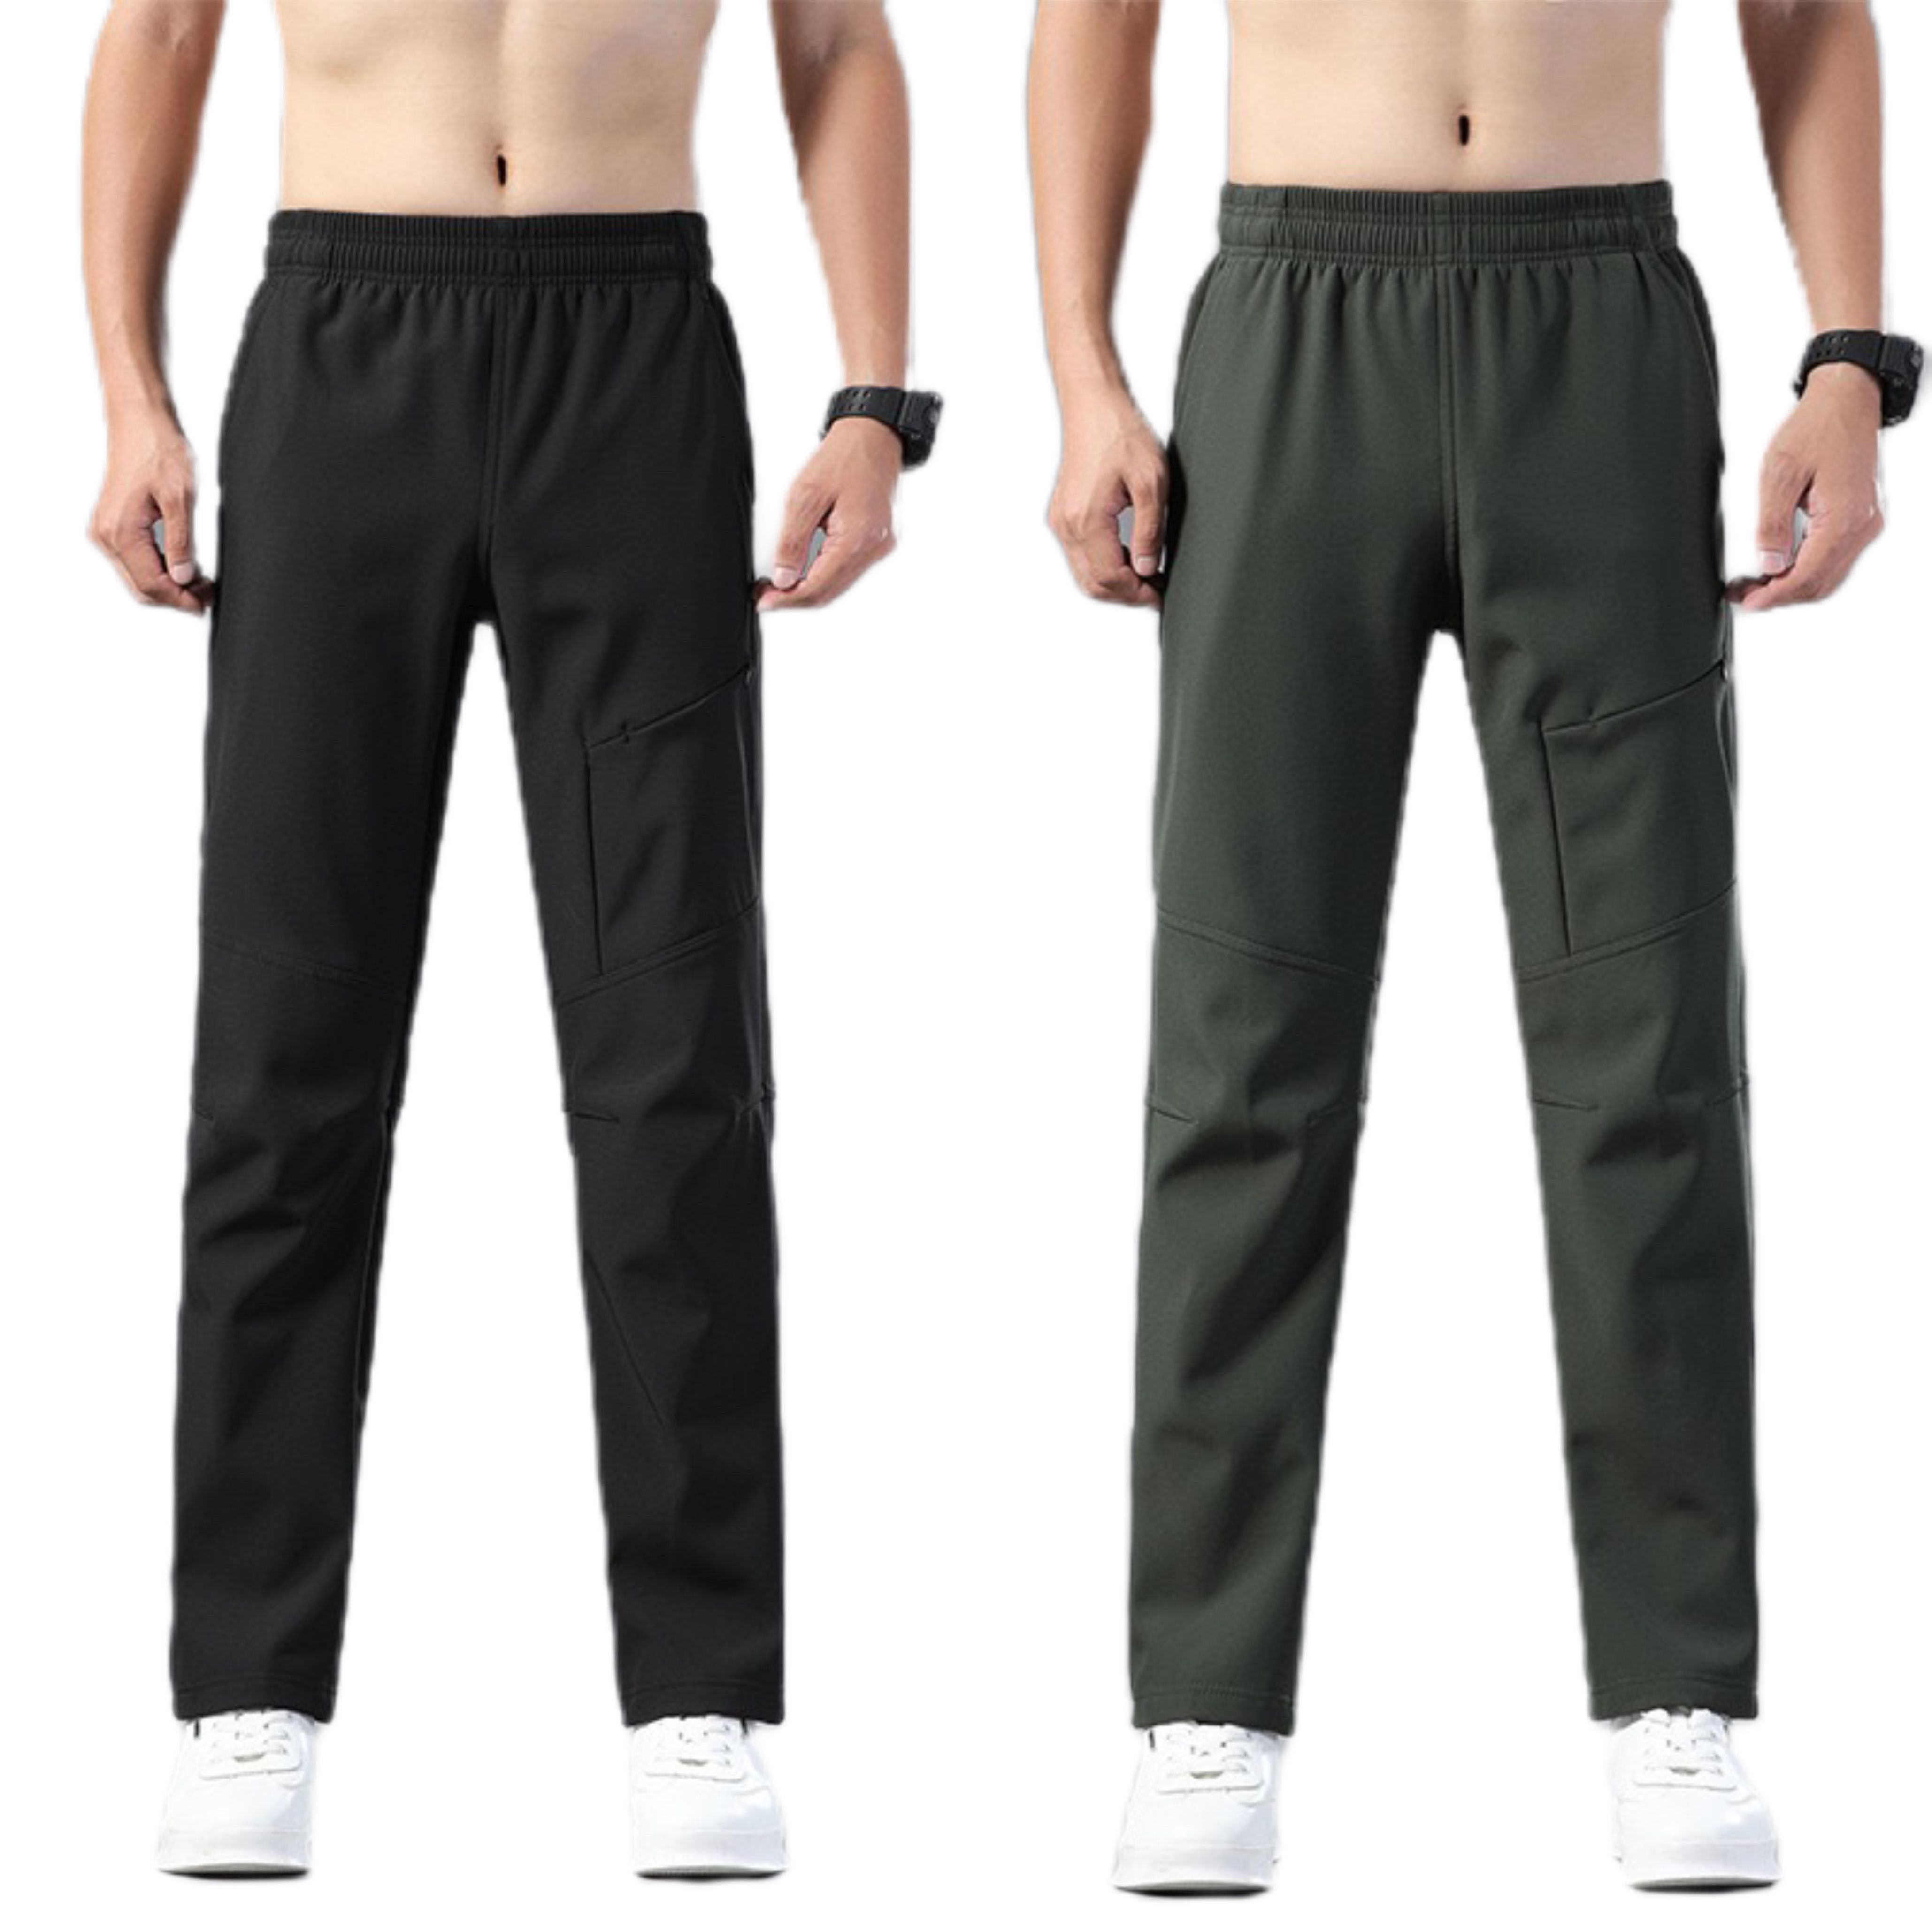 

designer Yoga outfit LUlus align Outdoor warm men's cashmere casual trousers autumn and winter mountaineering wear-resistant stretch sports trousers